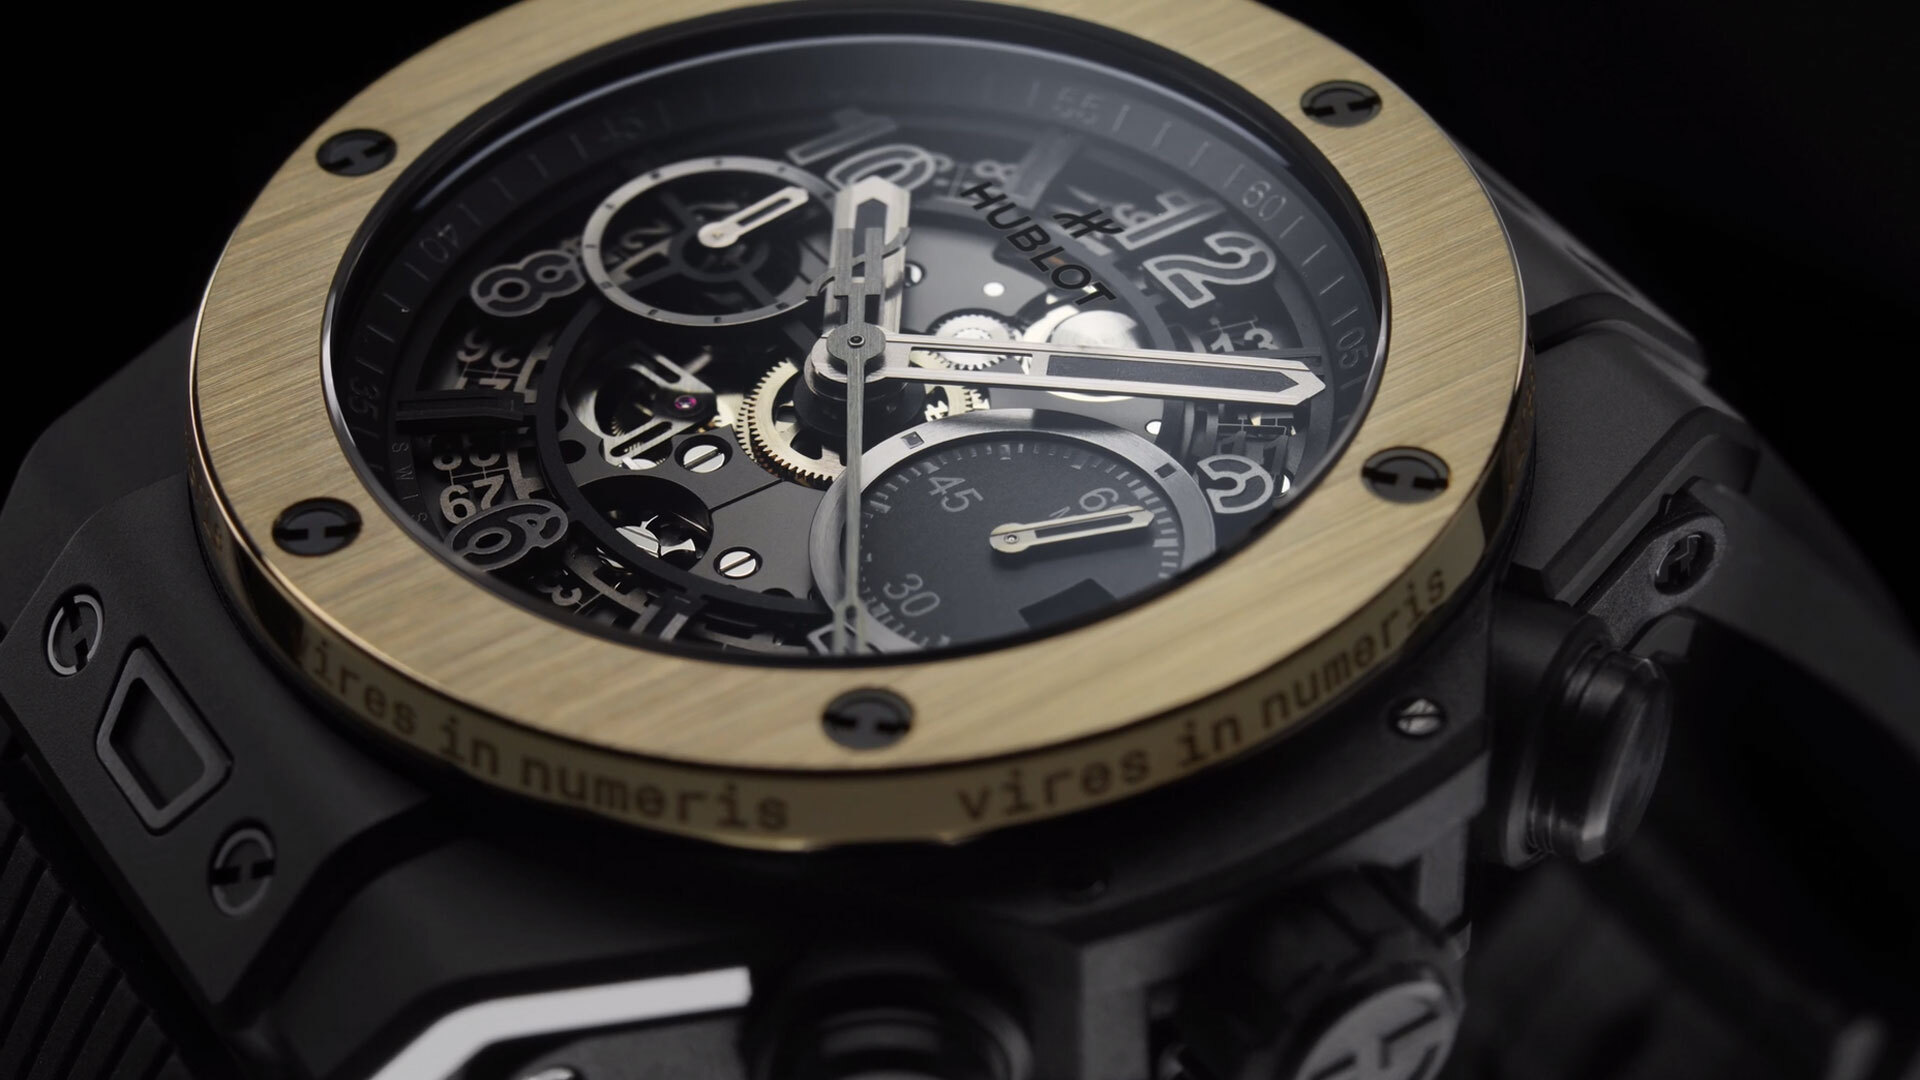 Hublot launches 3 Big Bang watches including Bitcoin timepiece